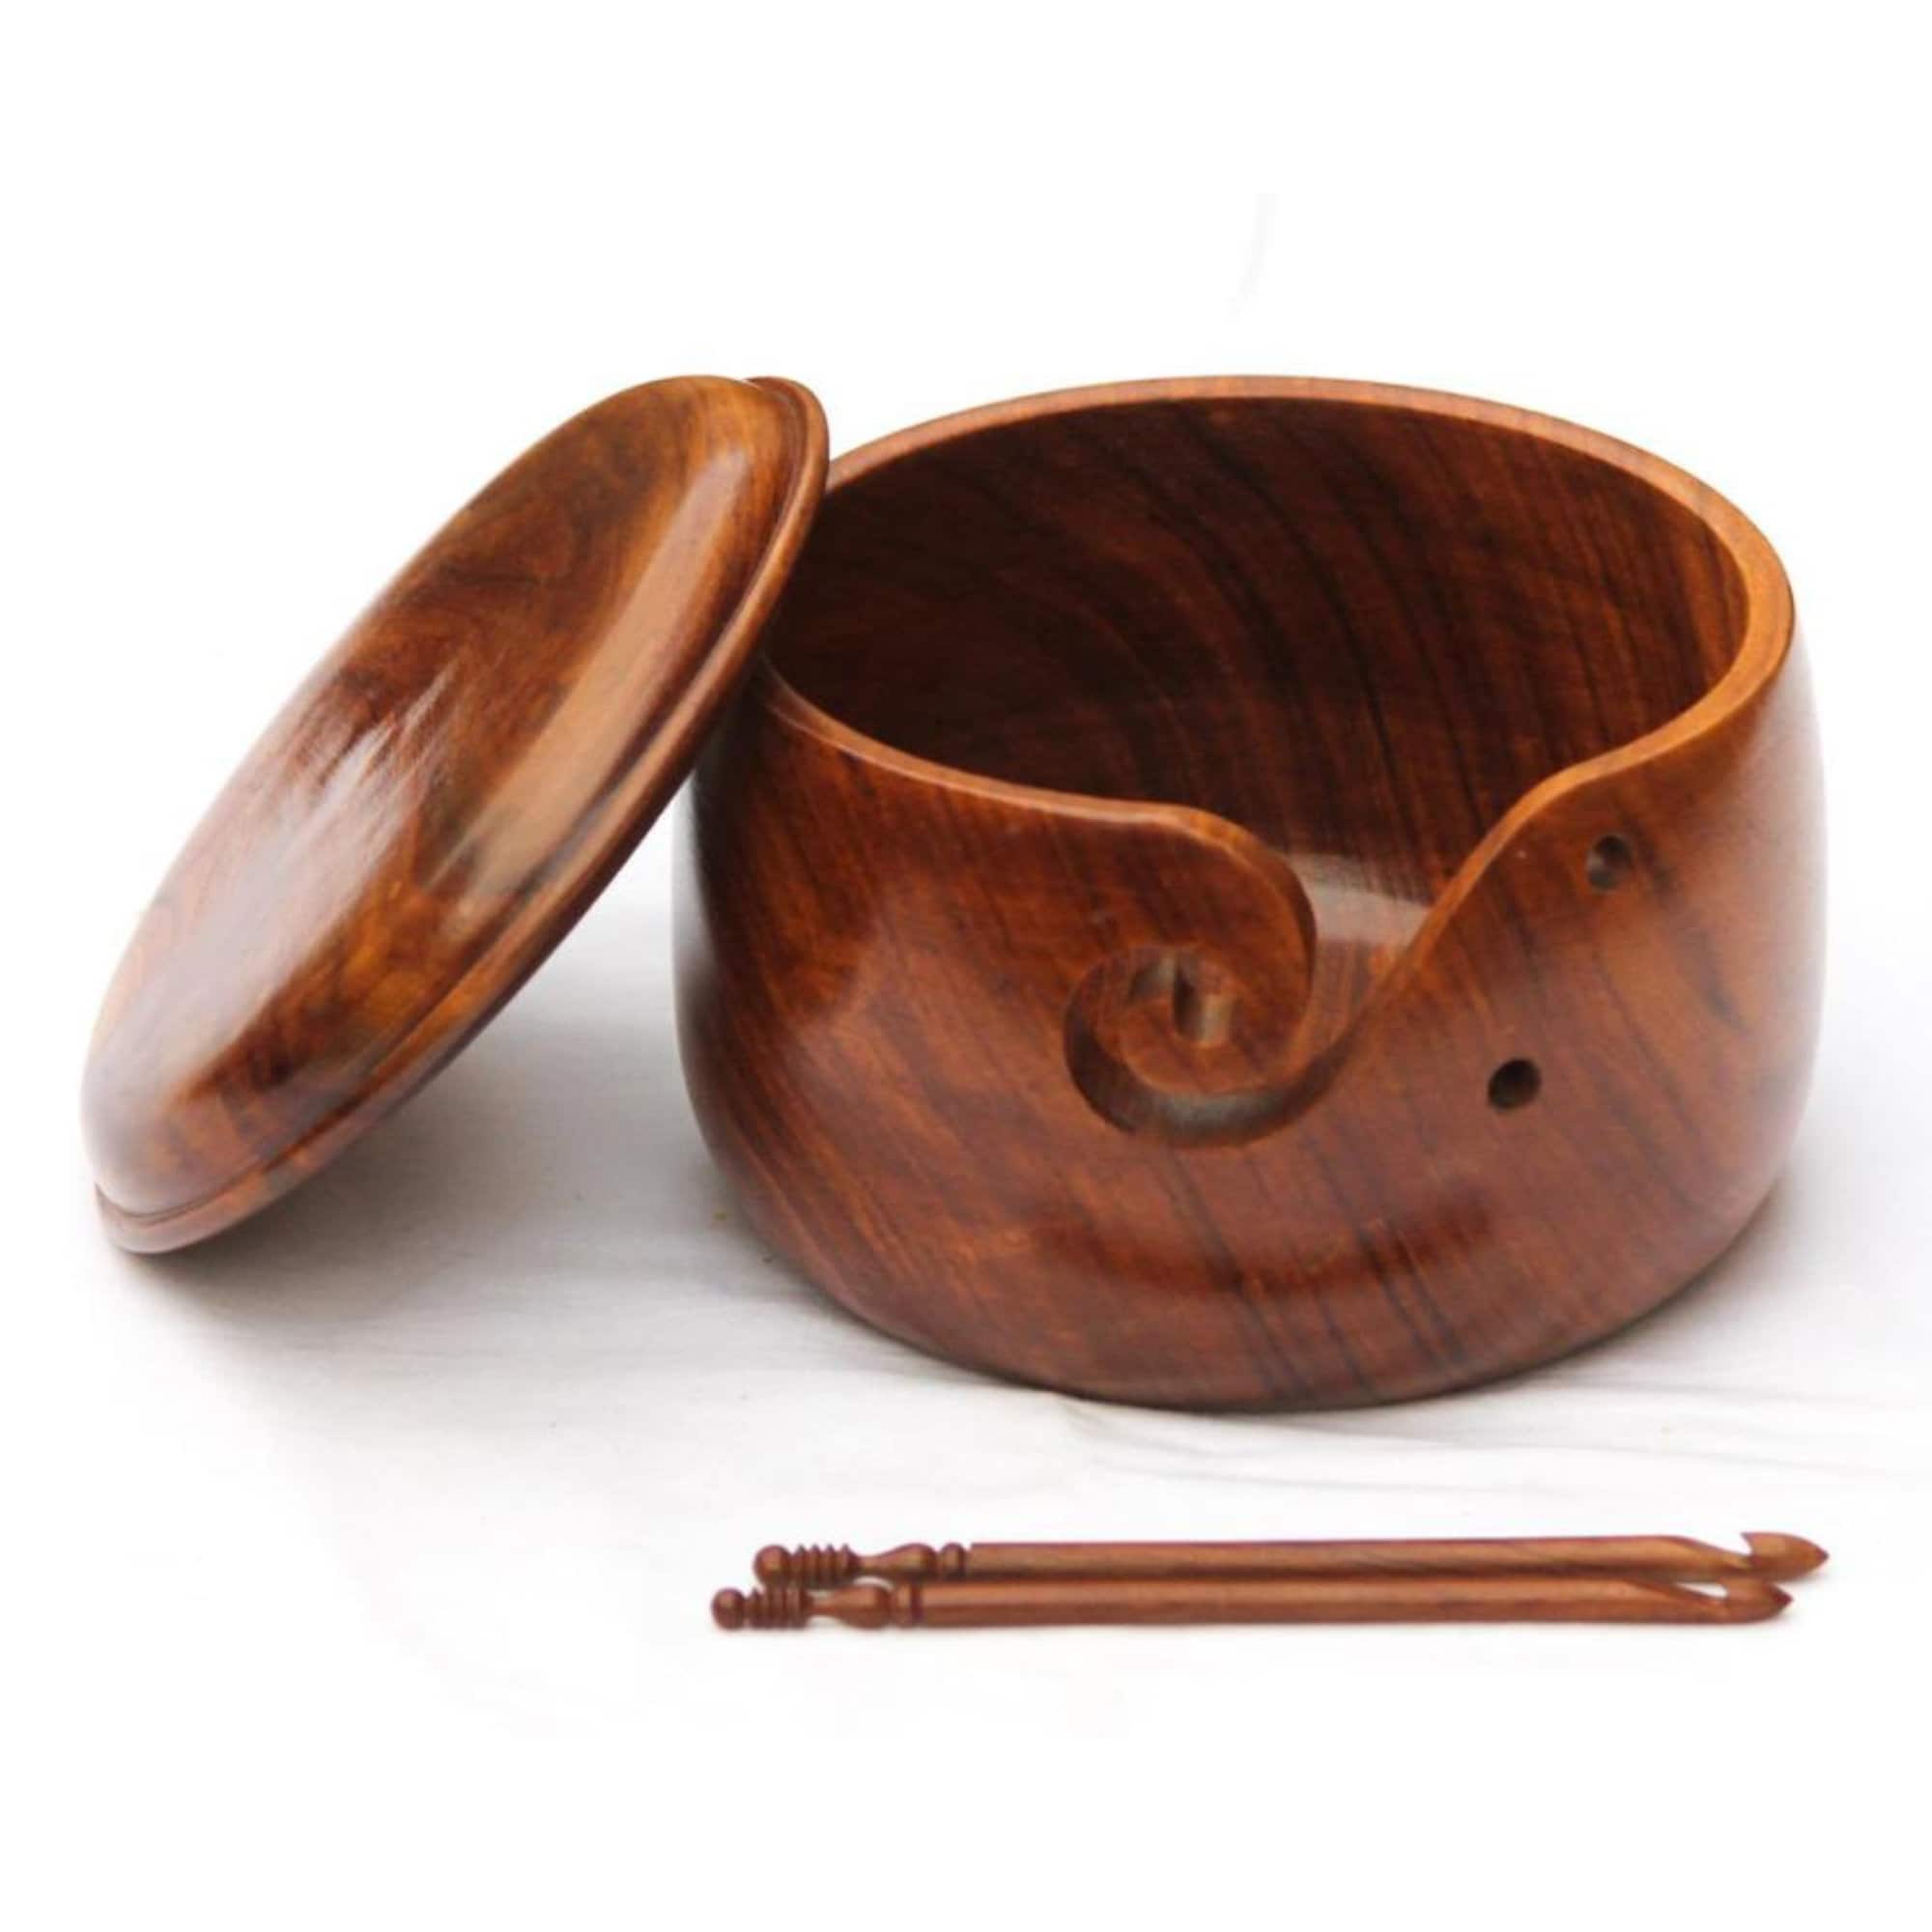 Wooden Yarn Bowls Large Yarn Holder Dispenser With Holes For